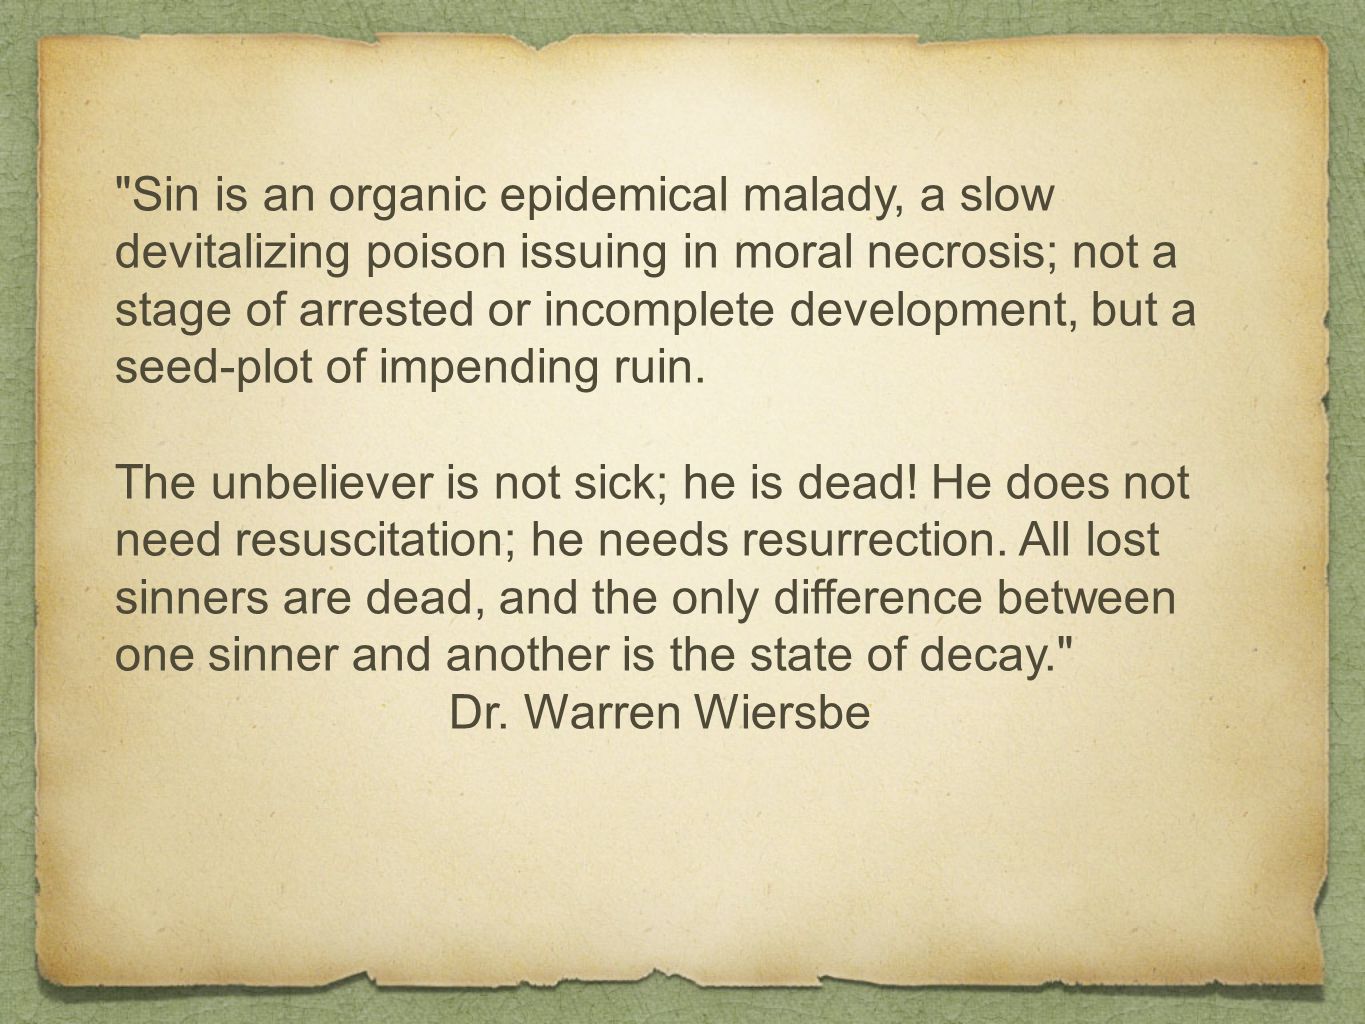 Sin is an organic epidemical malady, a slow devitalizing poison issuing in moral necrosis; not a stage of arrested or incomplete development, but a seed-plot of impending ruin.